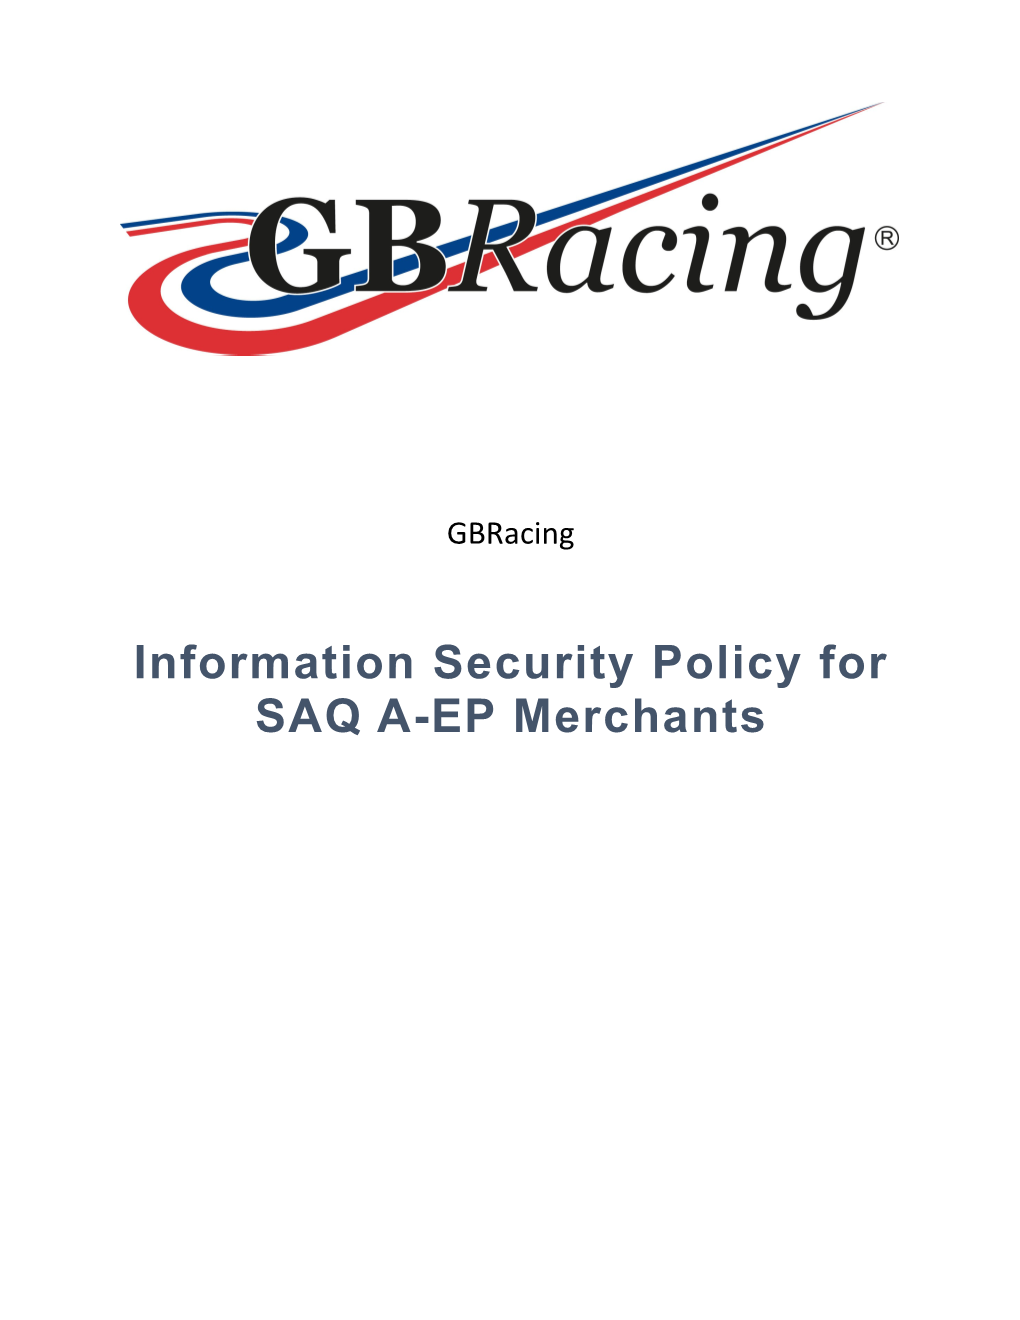 Information Security Policy for SAQ A-EP Merchants